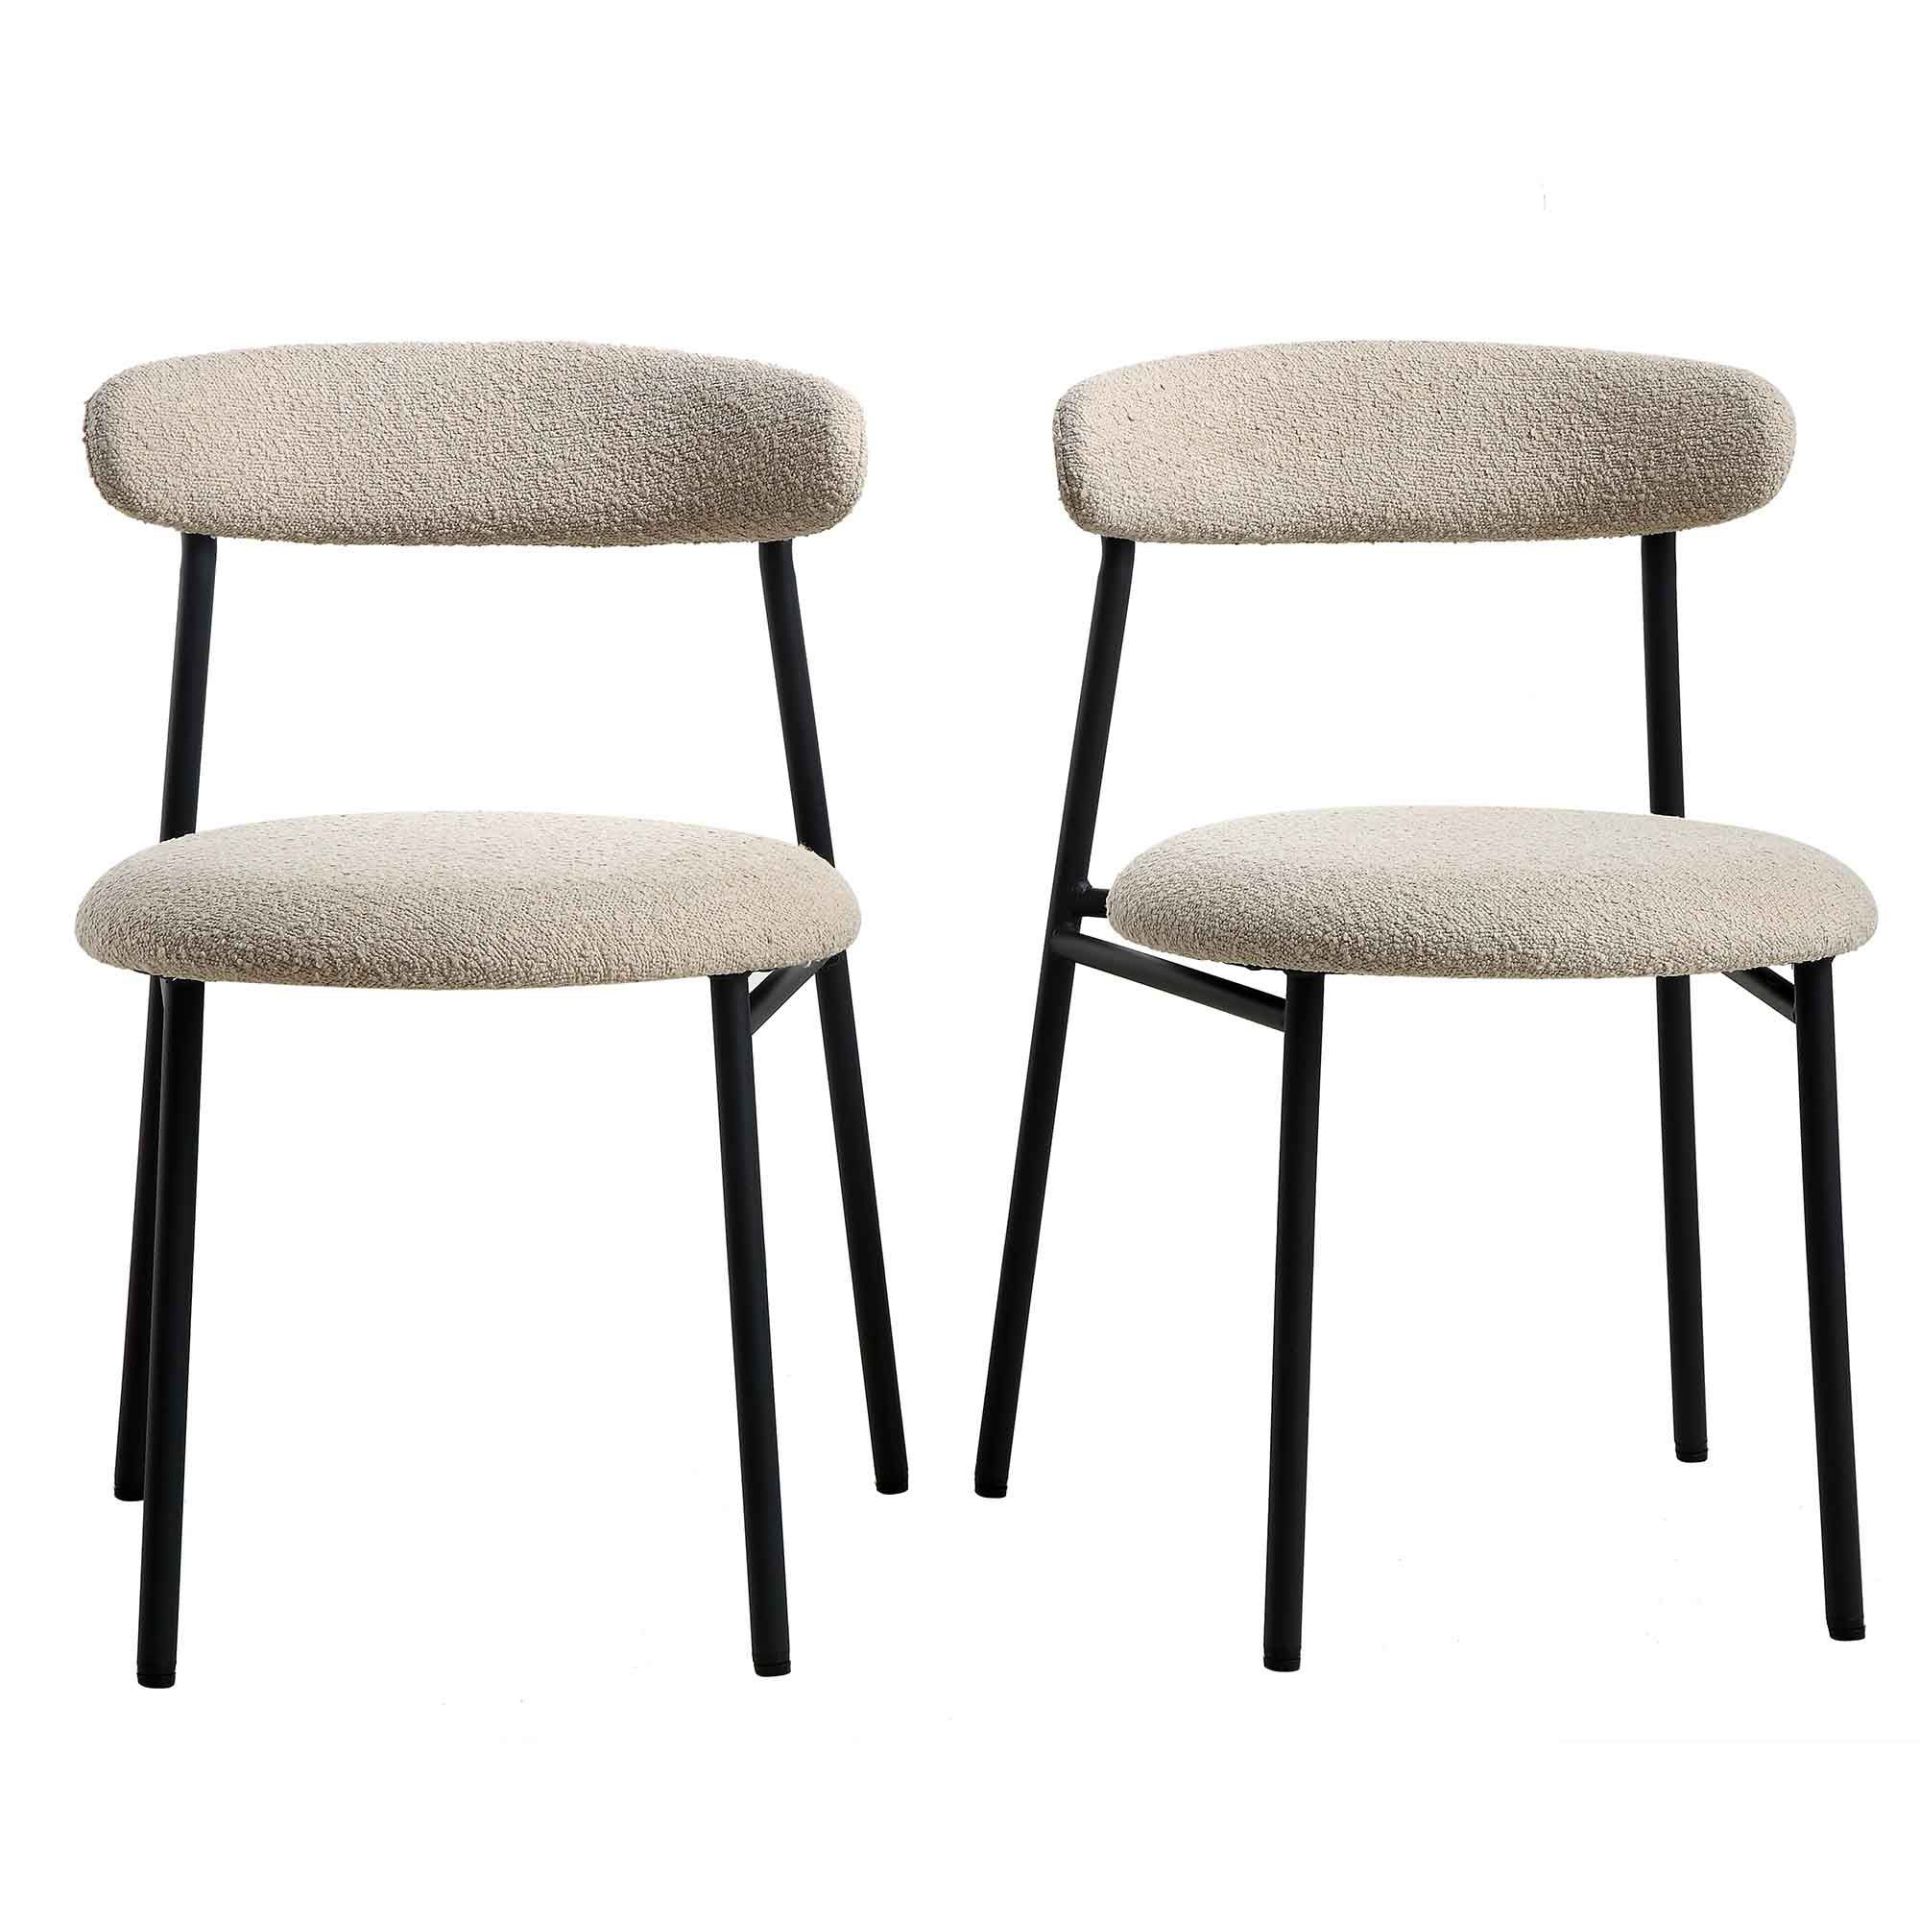 Donna Set of 2 Taupe Boucle Dining Chairs. - SR24. RRP £199.99. The ultra-slim black metal legs